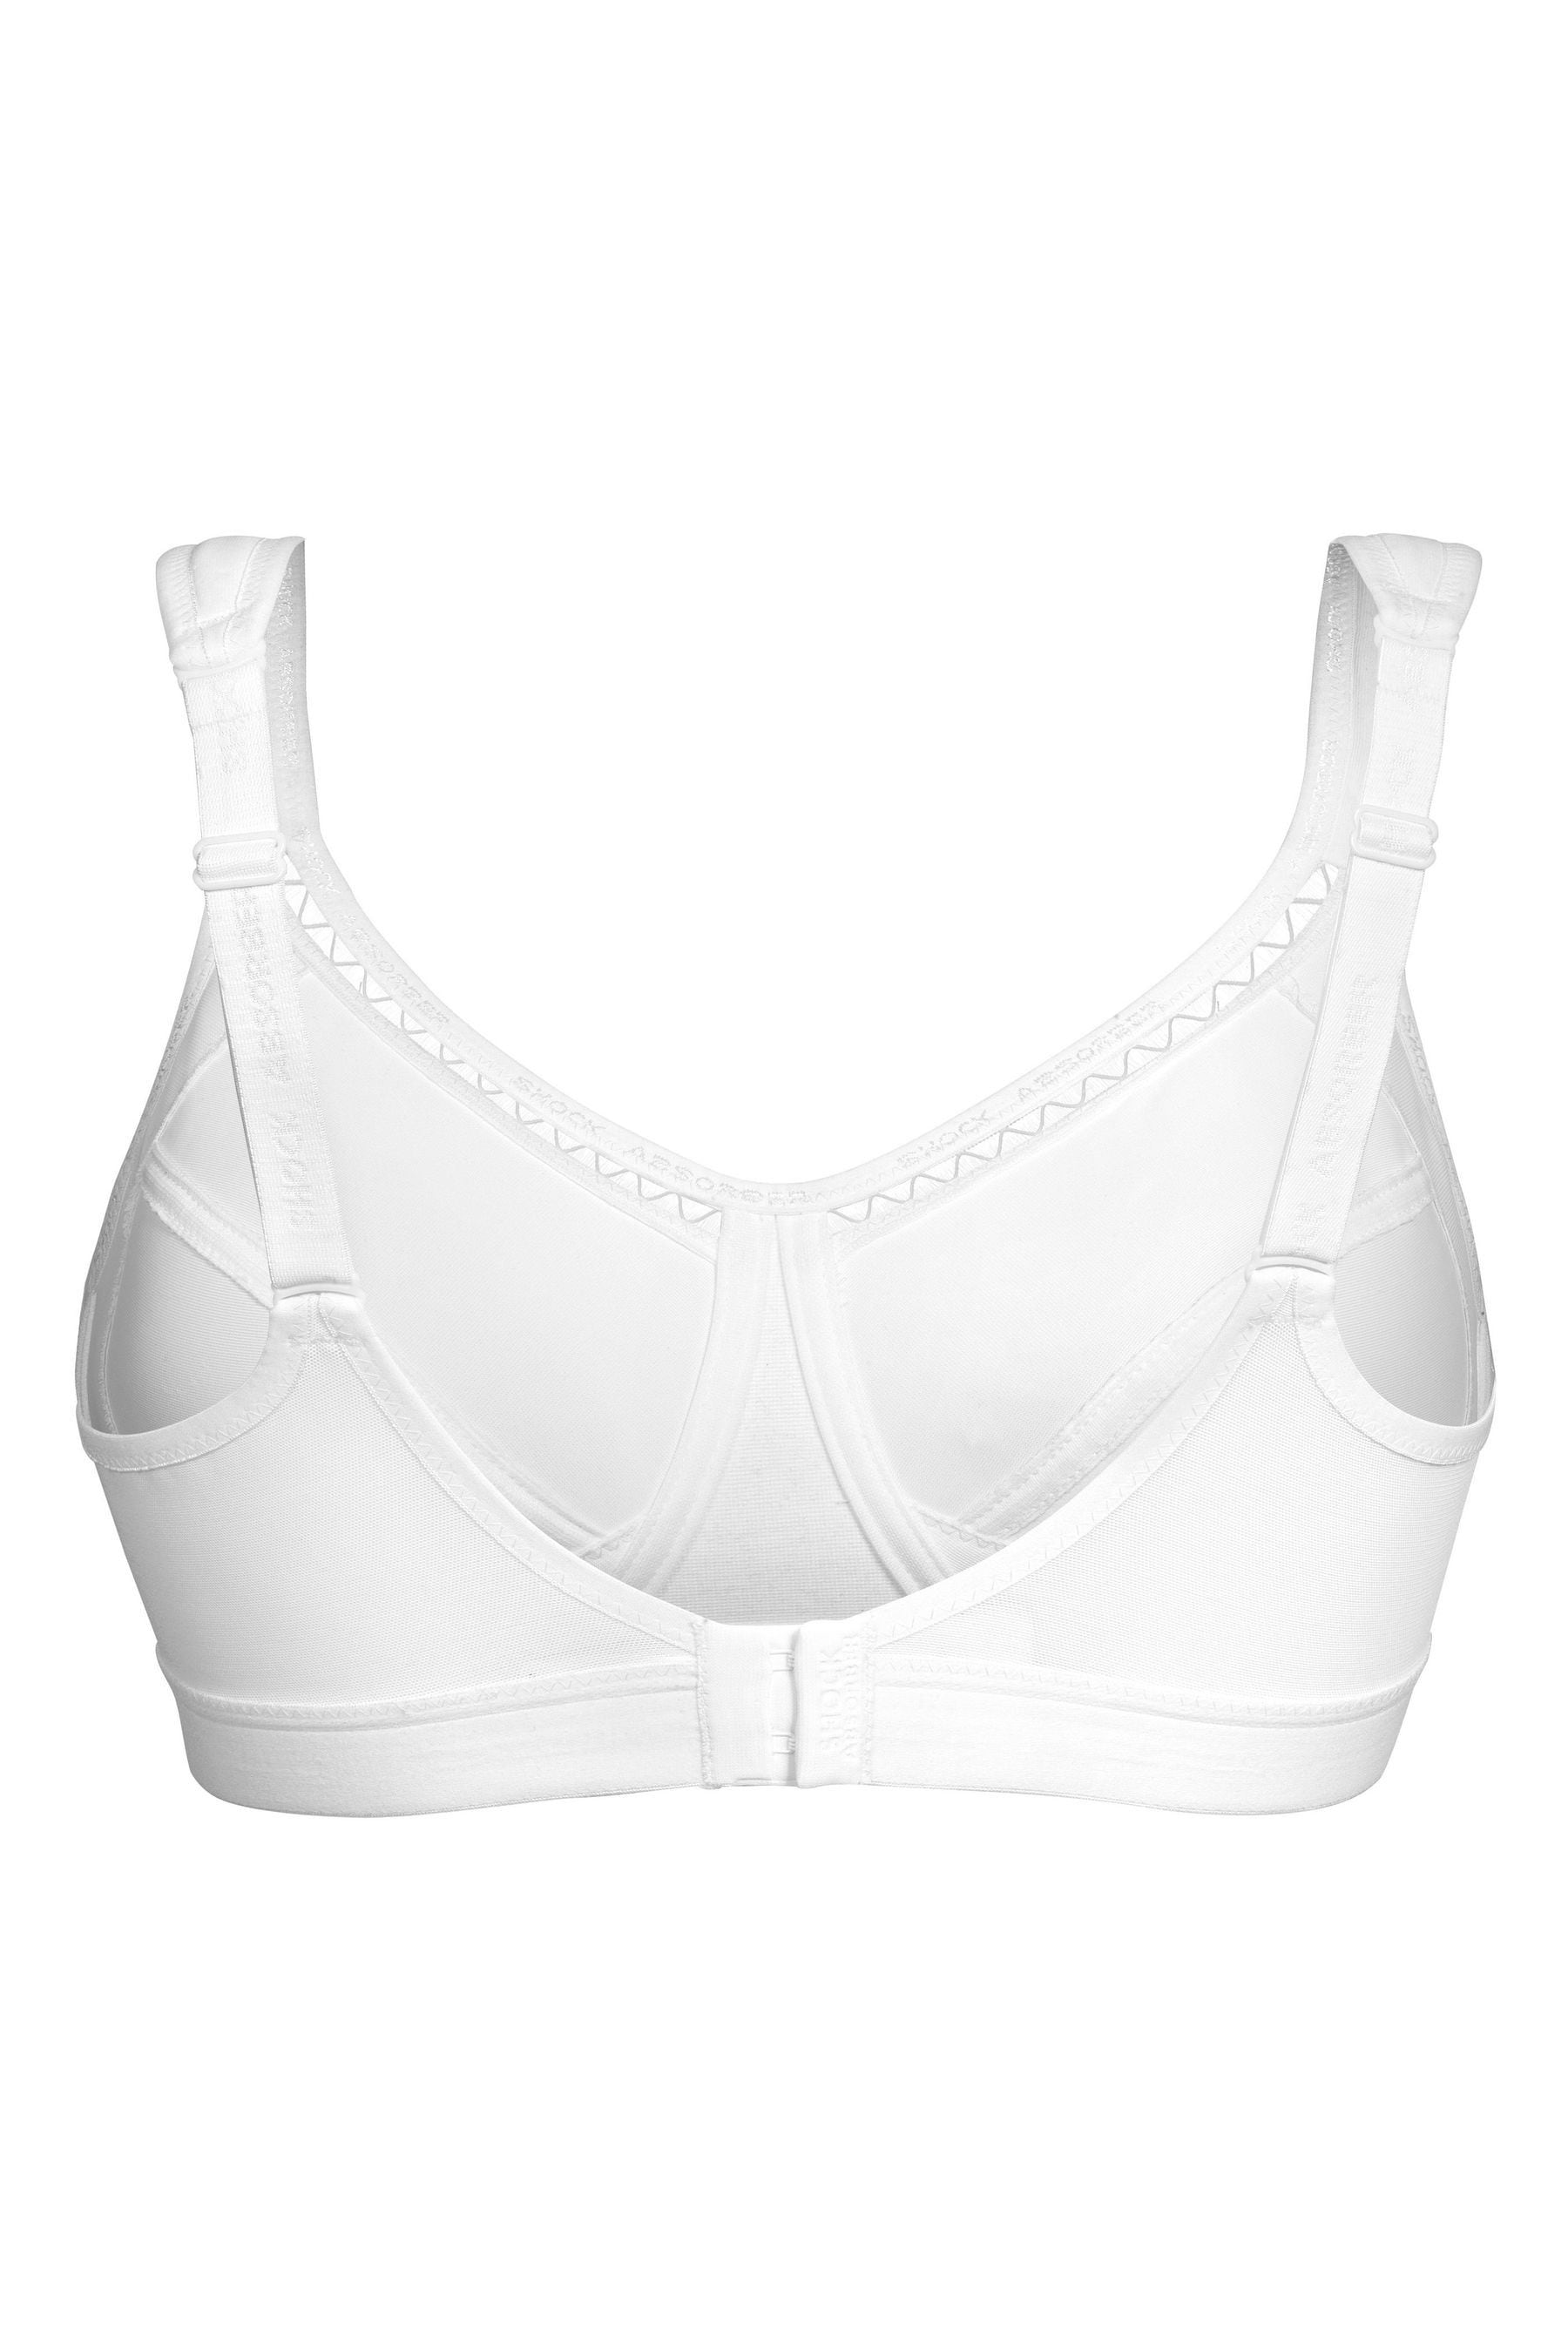 Buy Shock Absorber Active Classic Support Bra from the Next UK online shop